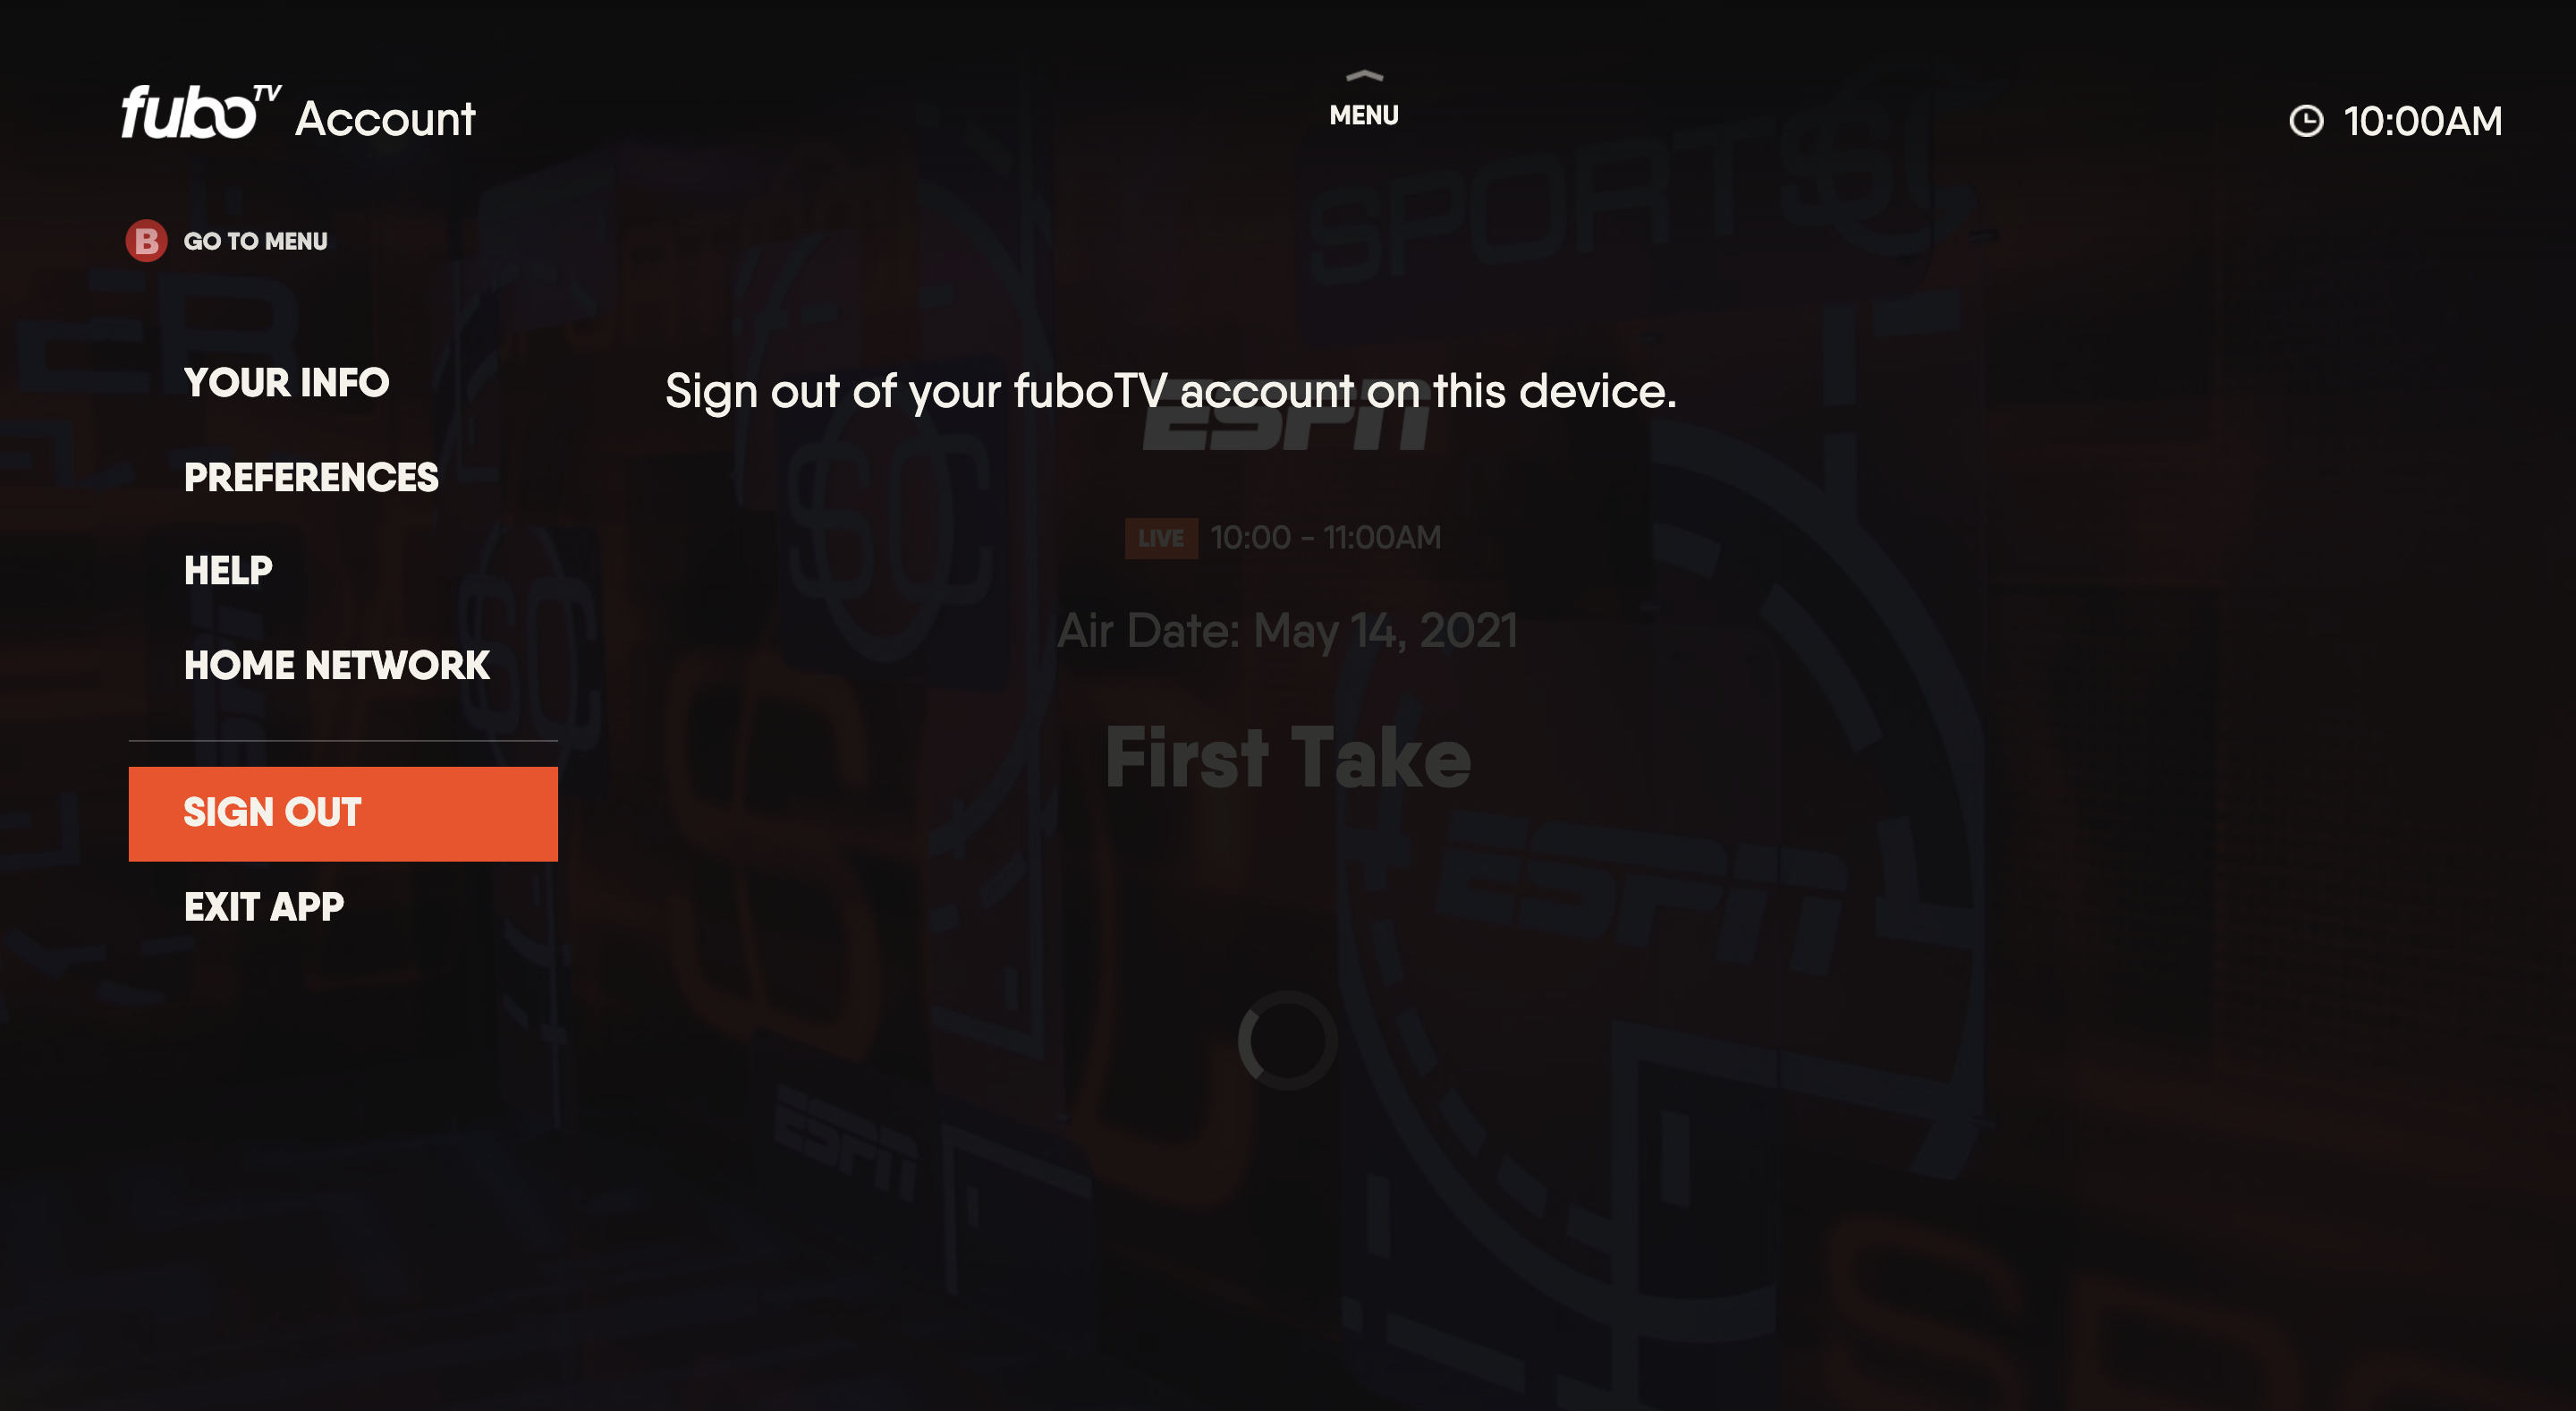 Account page of the FuboTV app on a Vizio TV with SIGN OUT button highlighted